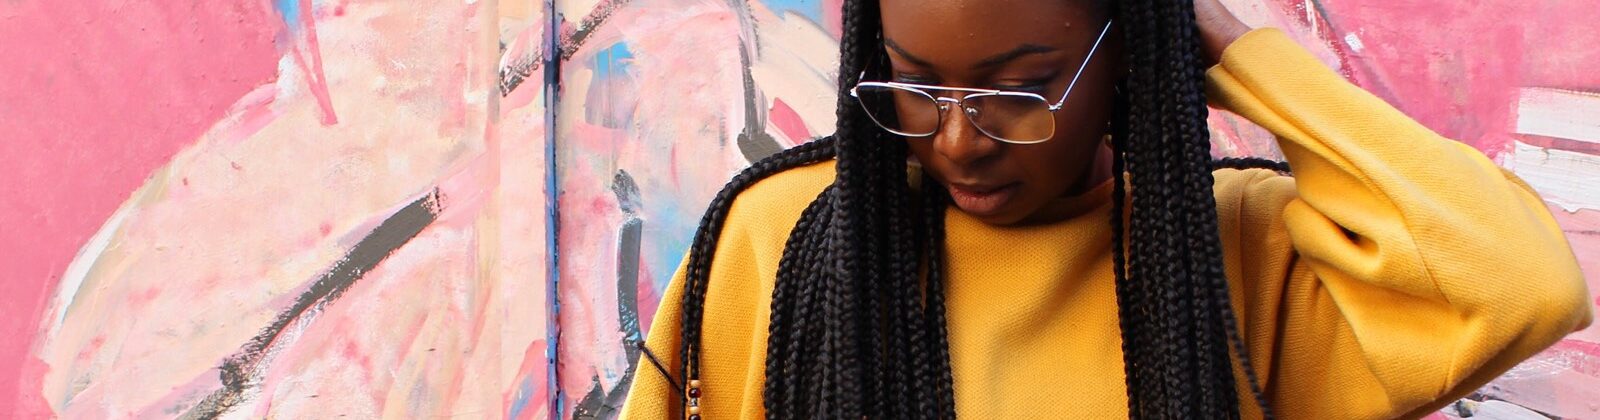 33 Lemonade Braids Trending Styles And How To Rock Them In 2019